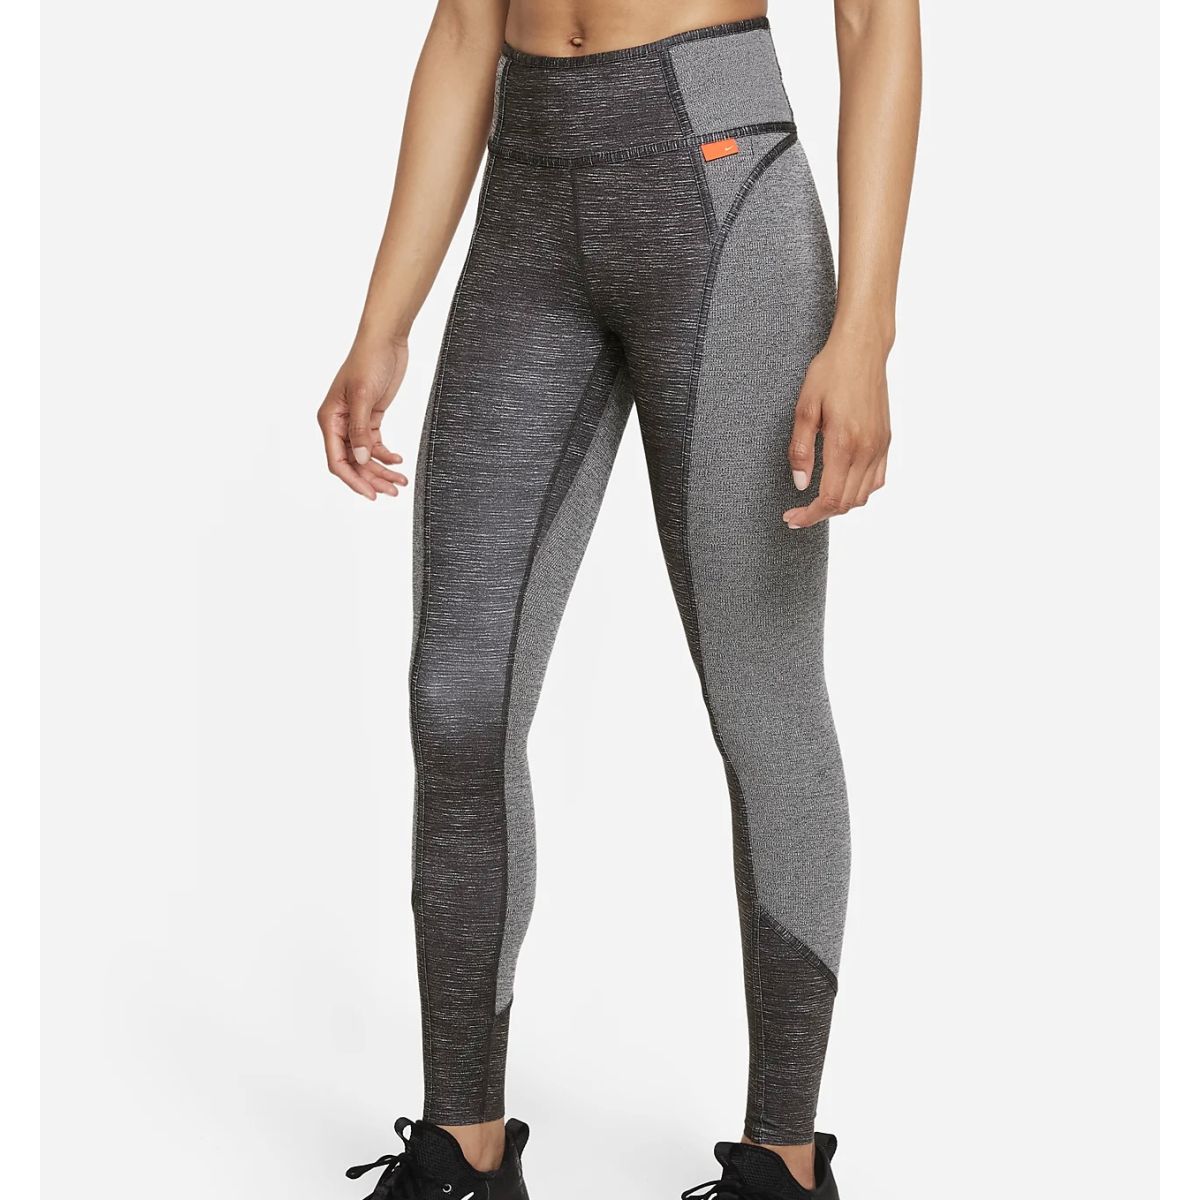 Nike Dri-FIT One Luxe Women's Mid-Rise Heathered Leggings